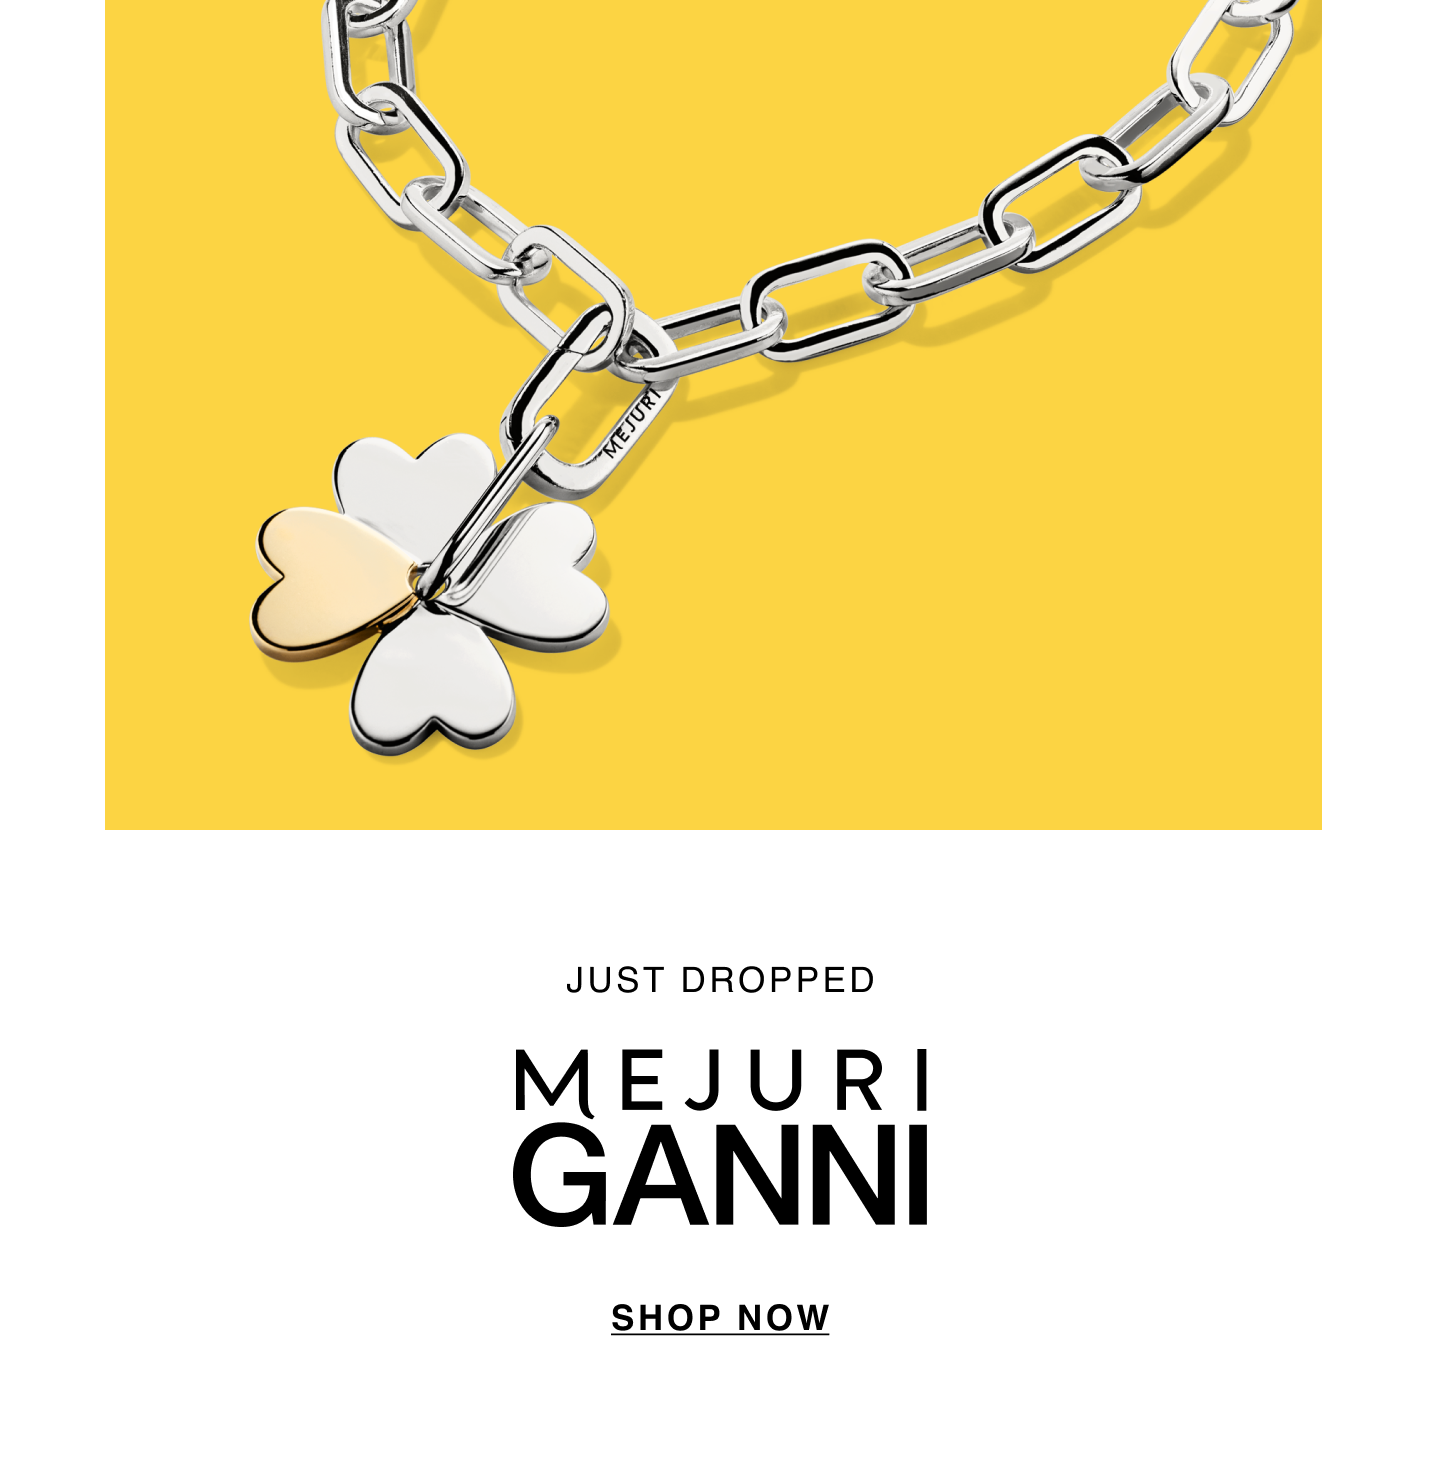 Just Dropped. Mejuri GANNI. Shop Now.